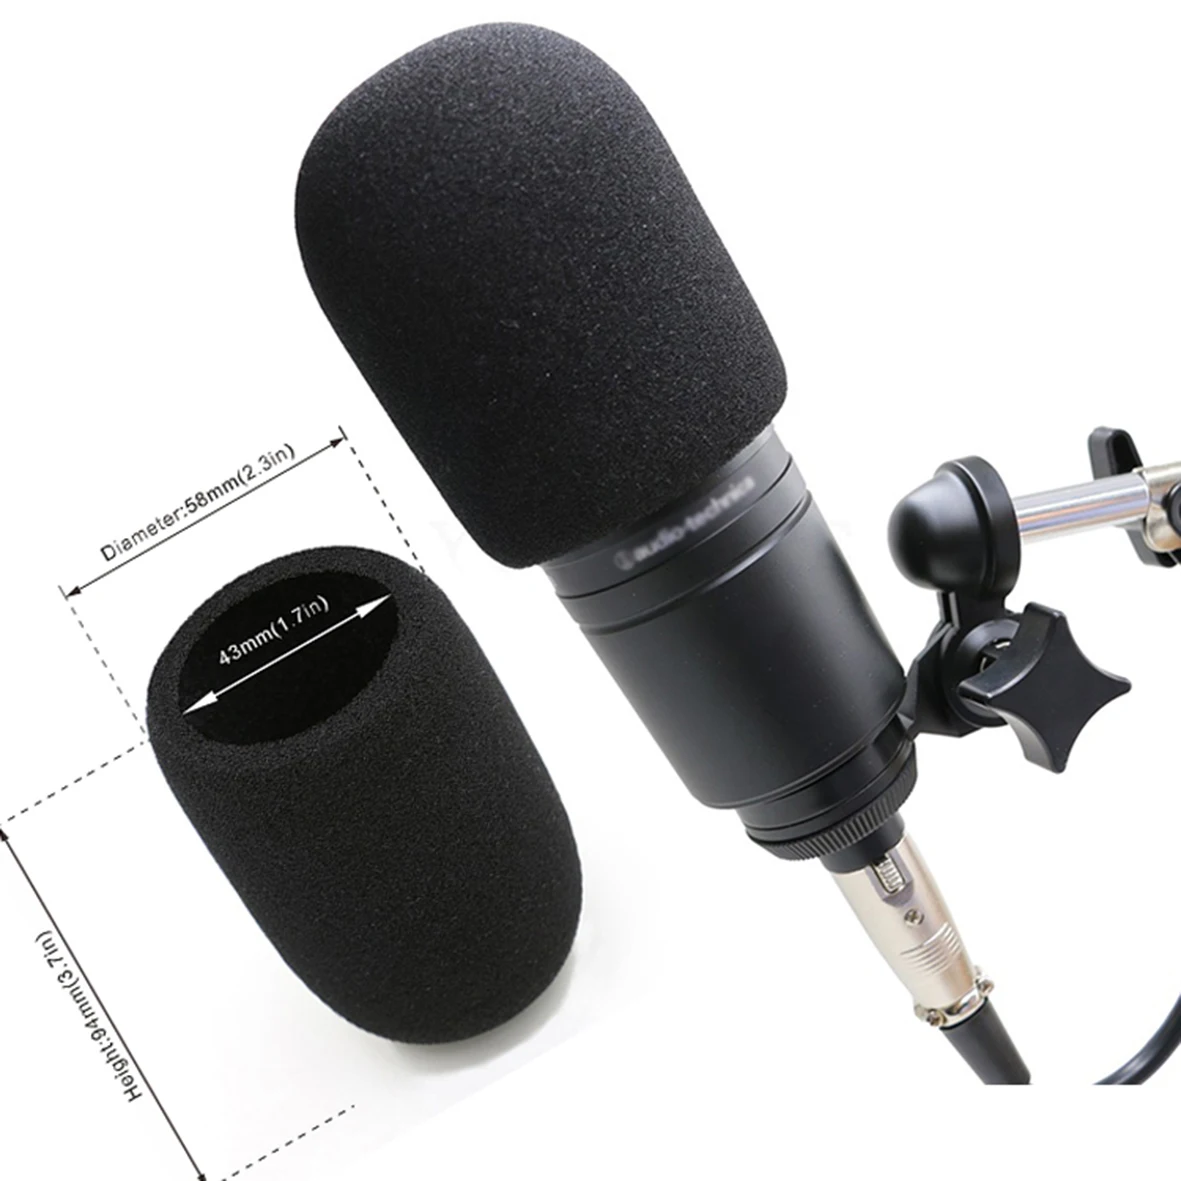 Mic Wind Cover Customized for Audio Technica AT2035 Condenser Microphone to Blocks Out Plosives AT2035 Pop Filter Foam Cover Windscreen